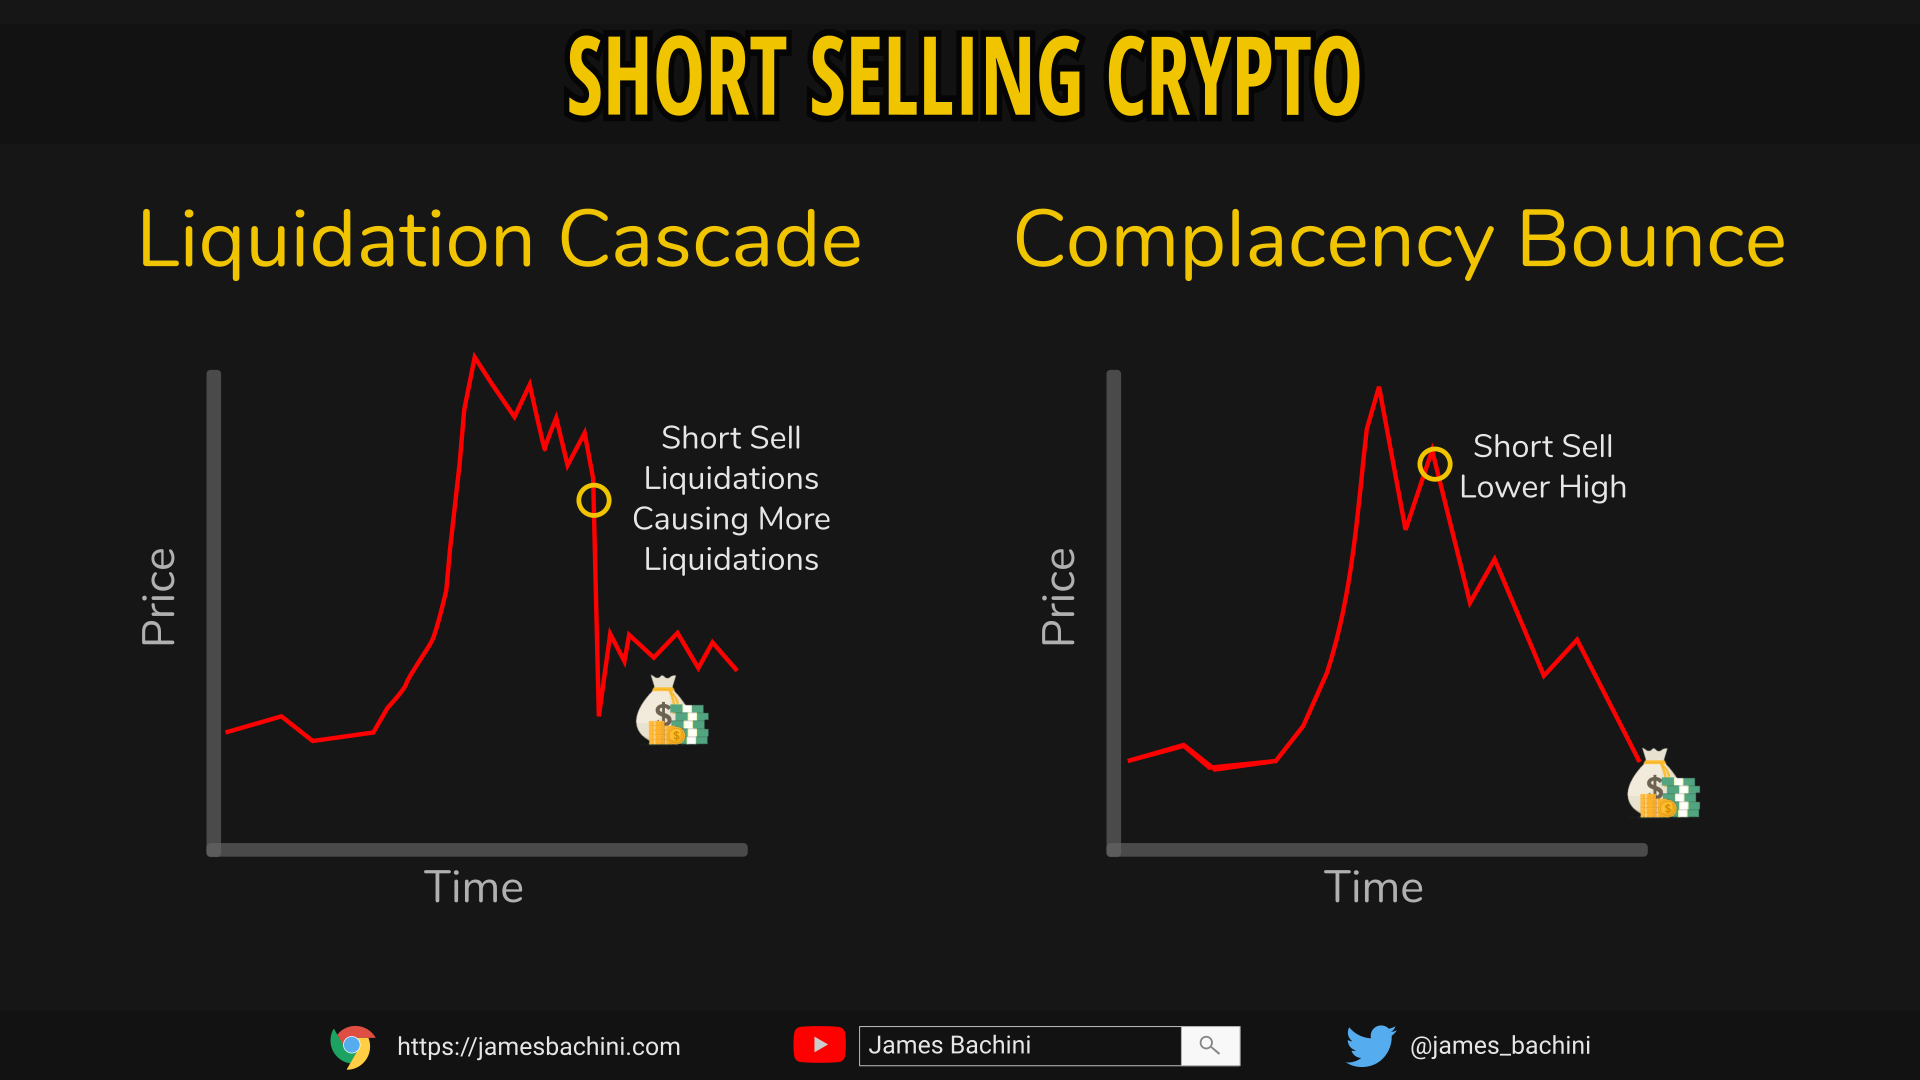 How to Short Crypto in 